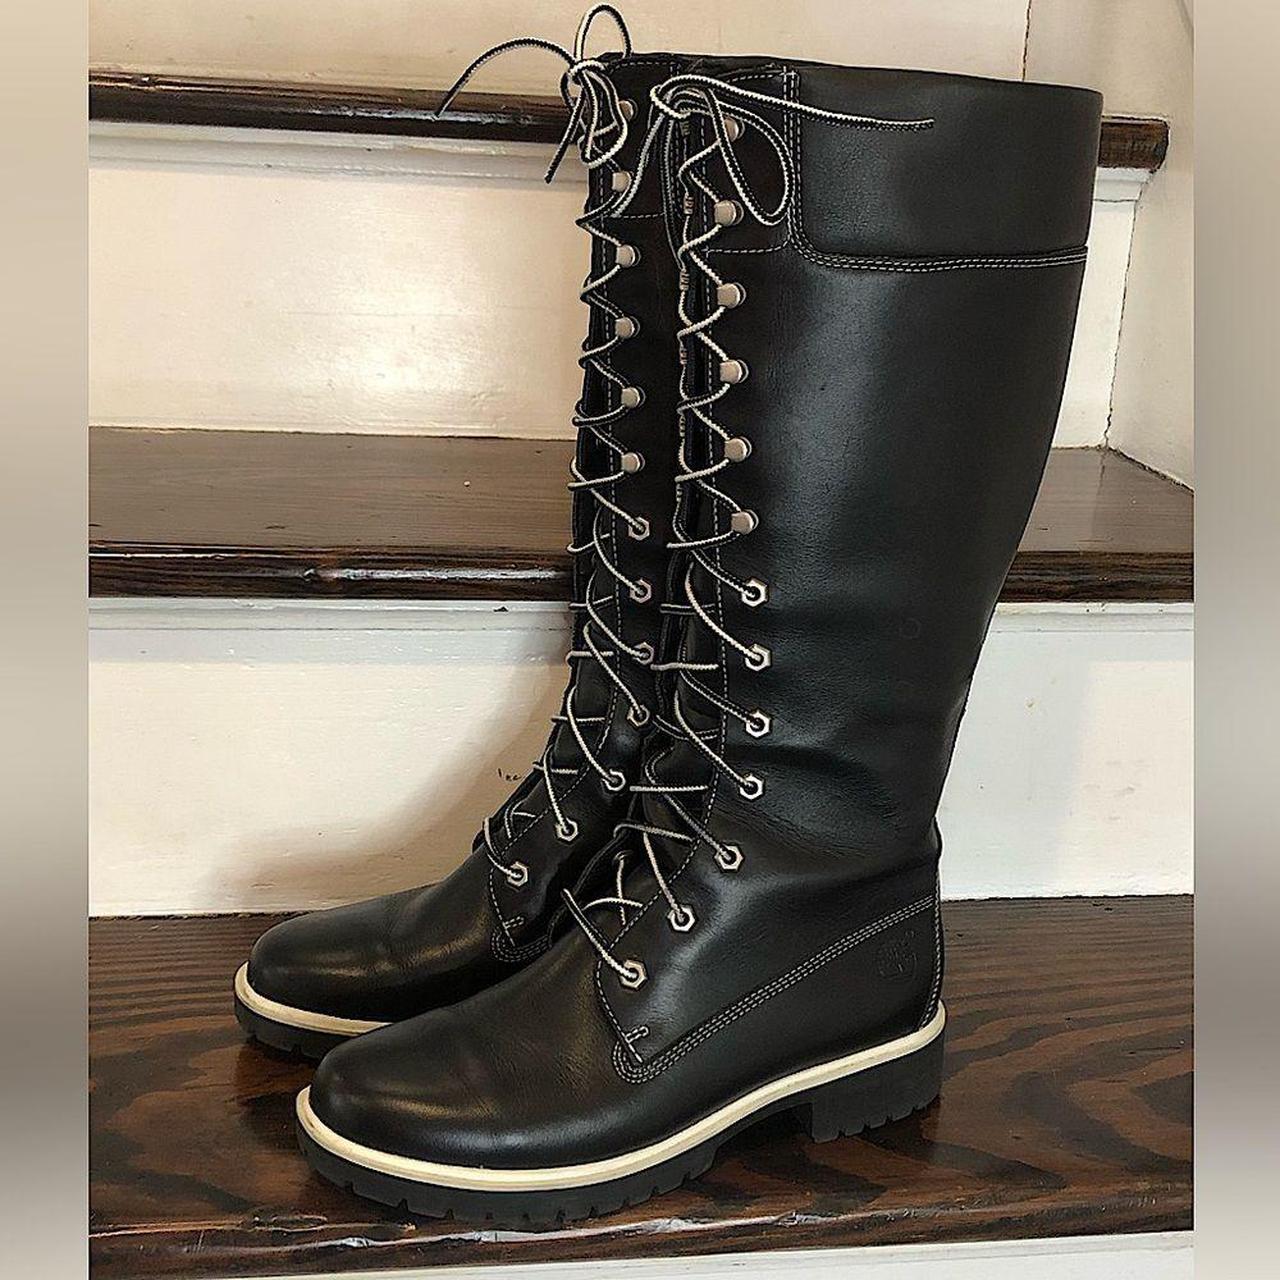 TIMBERLAND Lace Up Black Leather Healed Boots with... - Depop